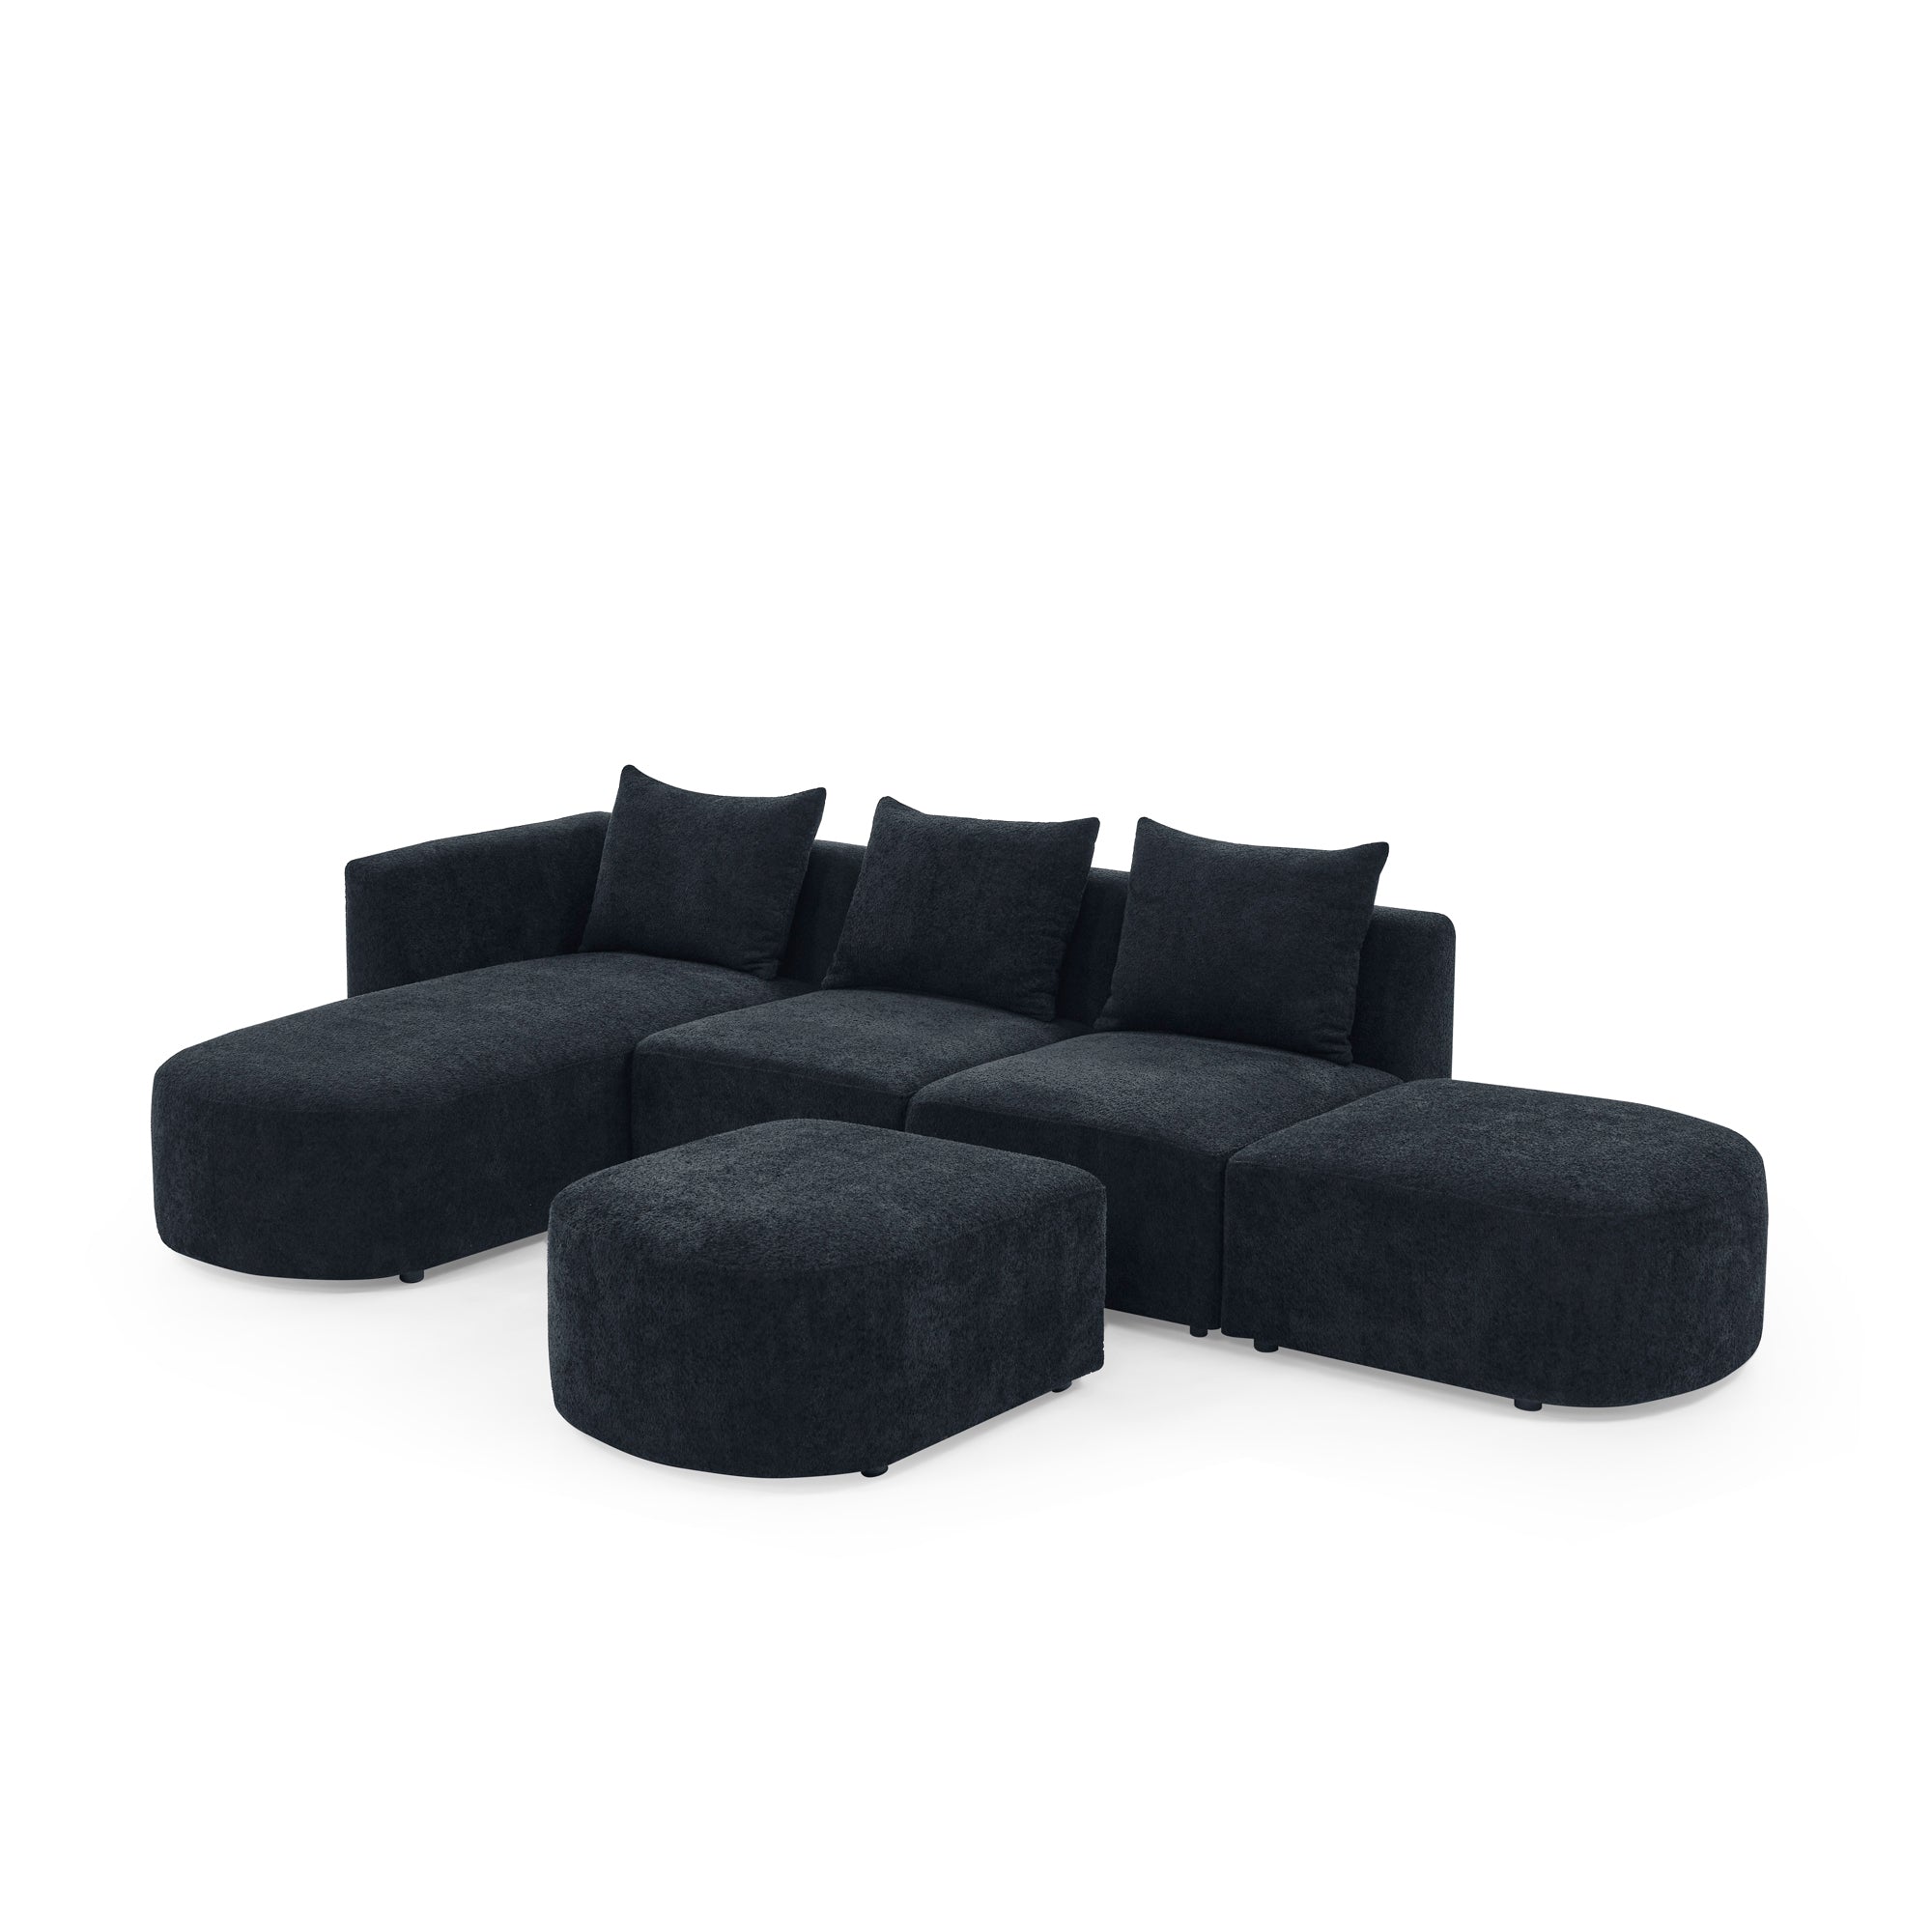 L Shape Sectional Sofa including Two Single Seats, Left Side Chaise and Two Ottomans - Black